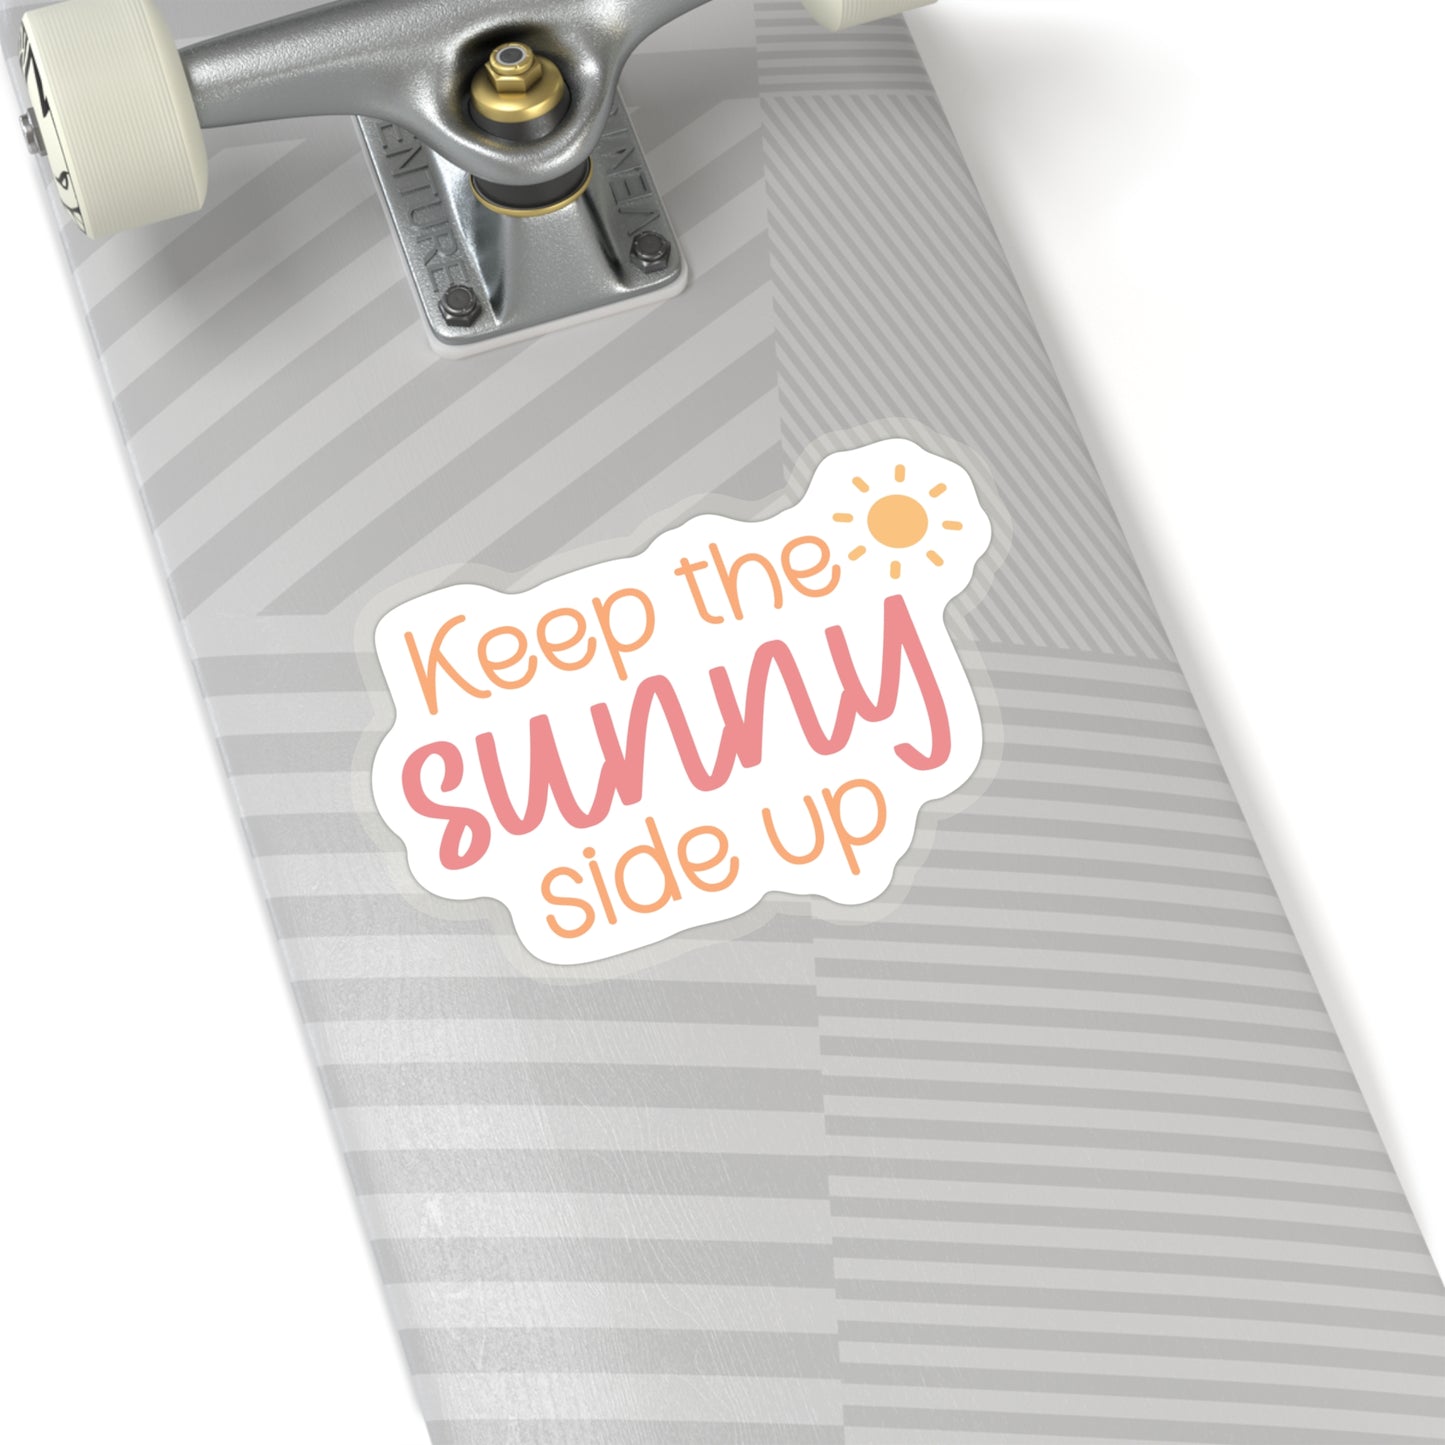 Keep the Sunny Side Up Sticker Bright Colors | Fun Stickers | Happy Stickers | Must Have Stickers | Laptop Stickers | Best Stickers